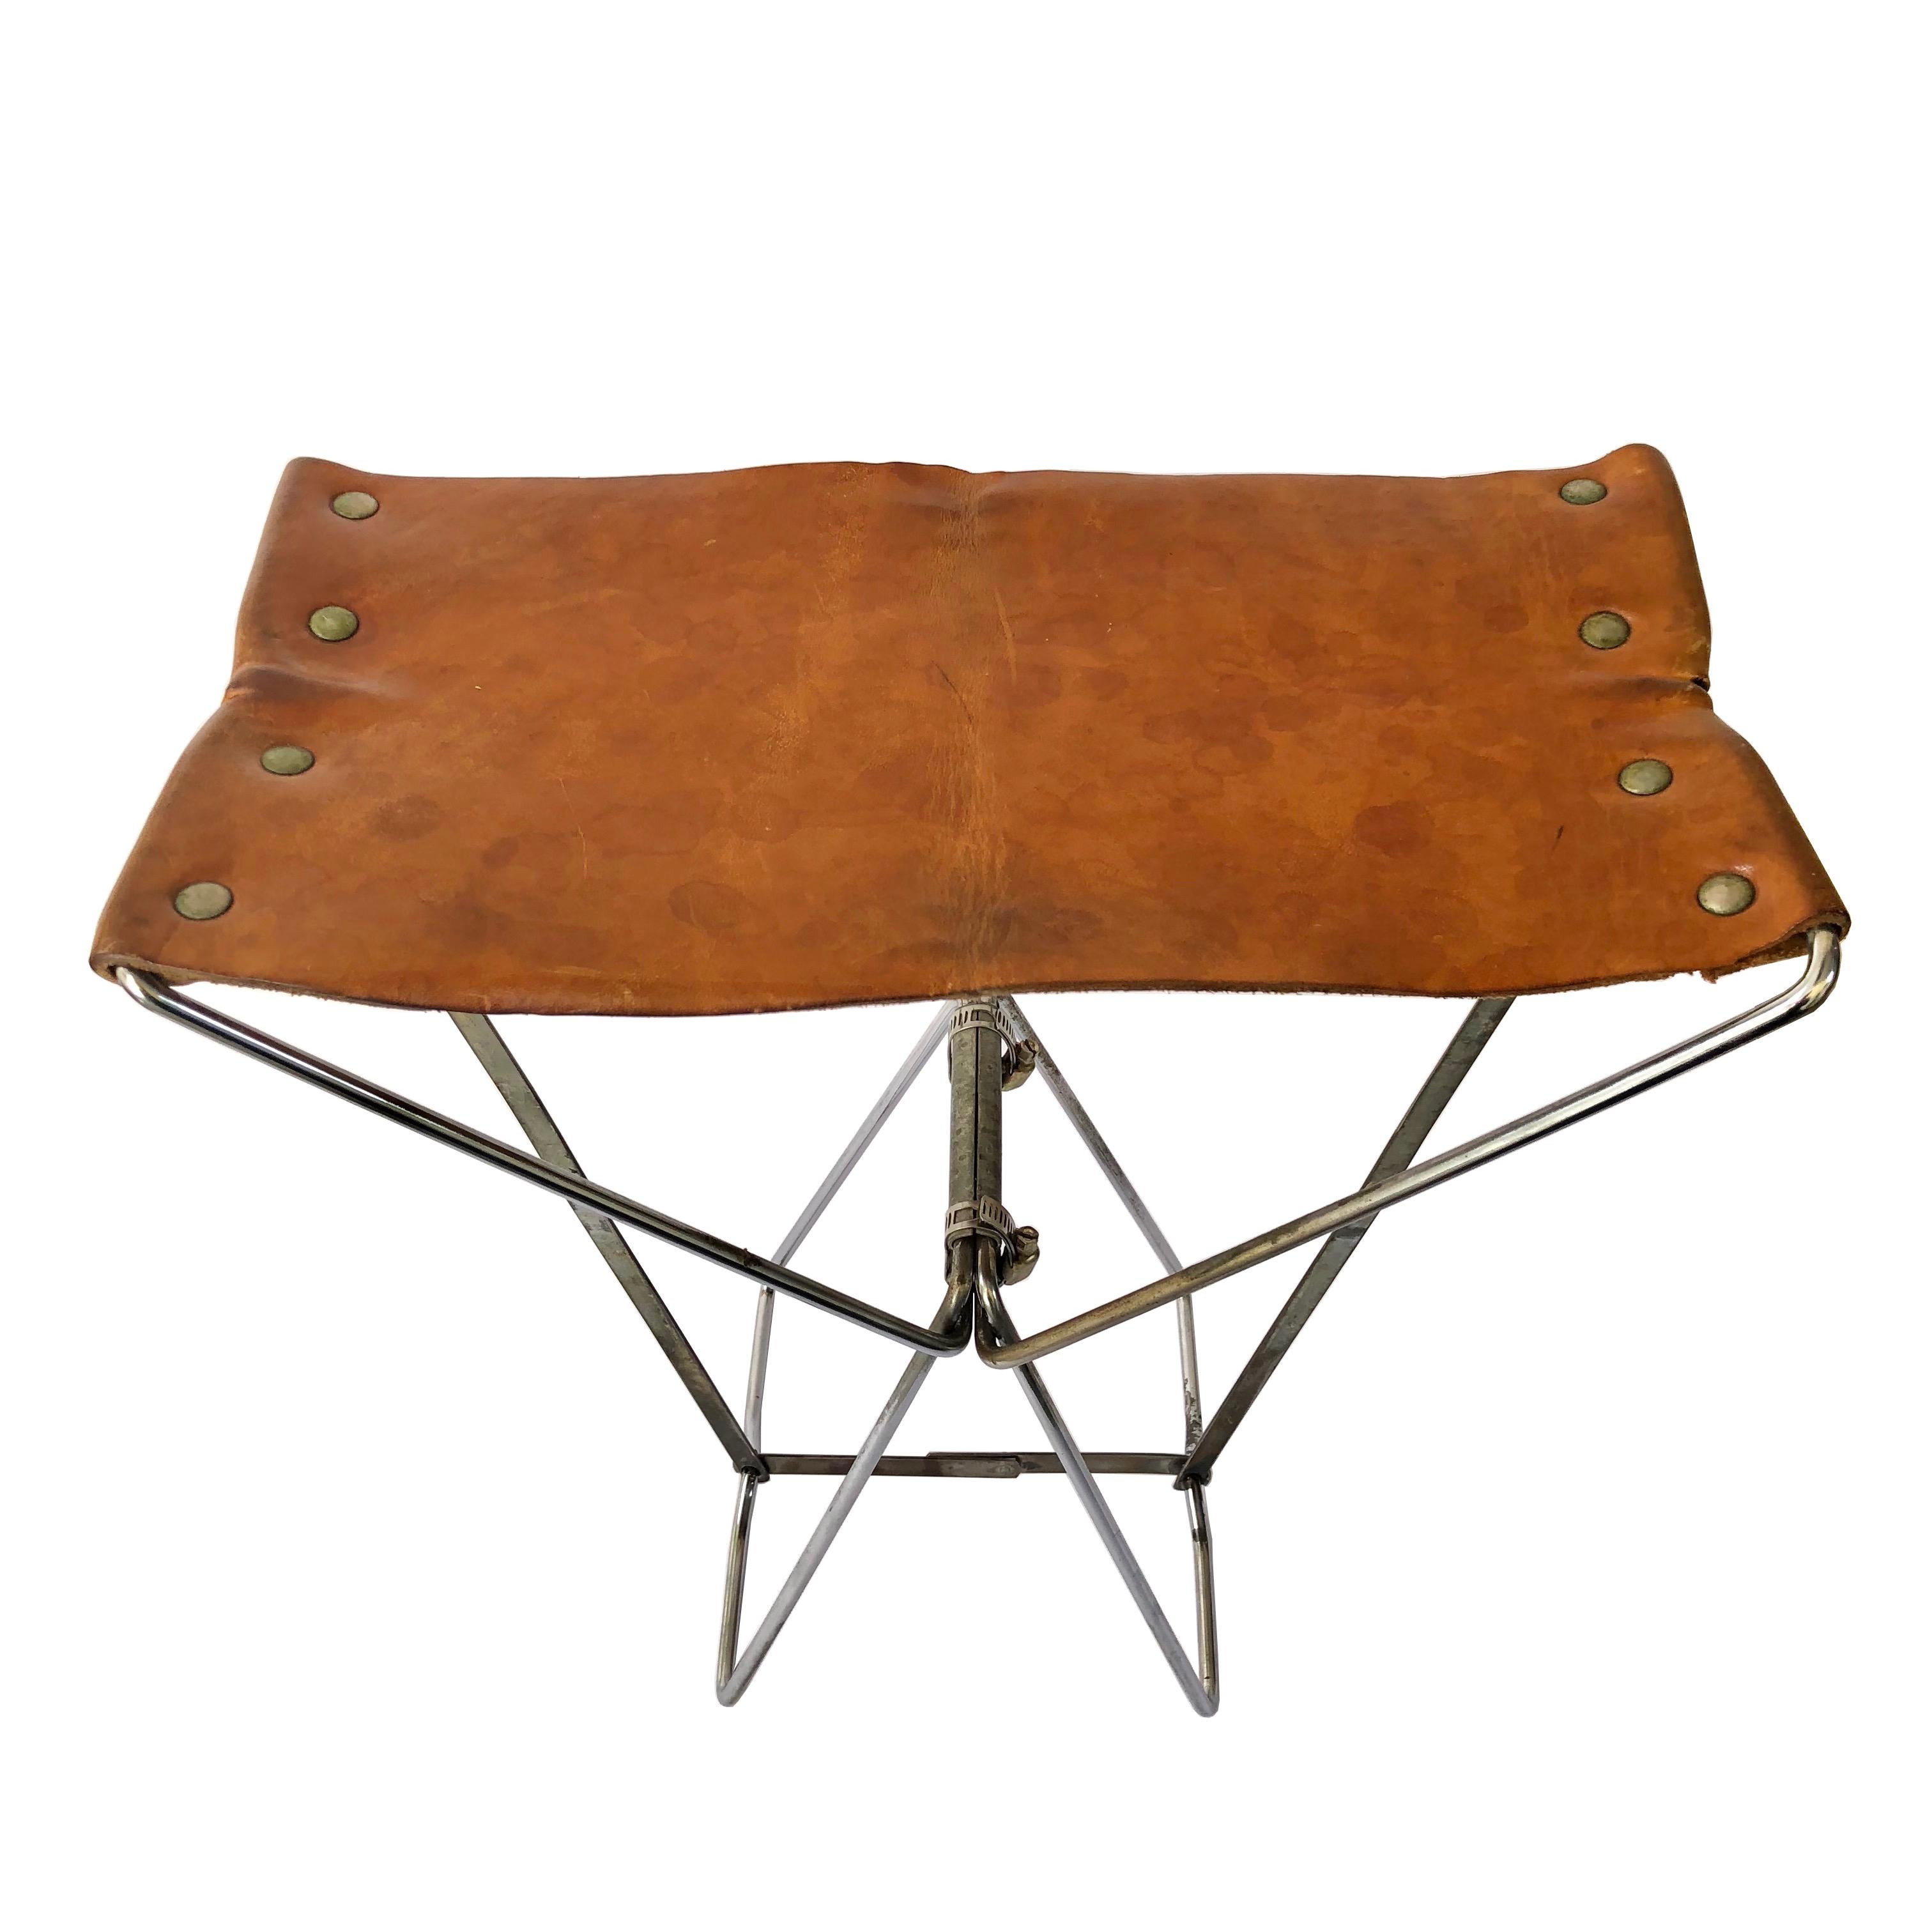 Little Folding Portable Stools in Brown Leather and Metal Industrial Style